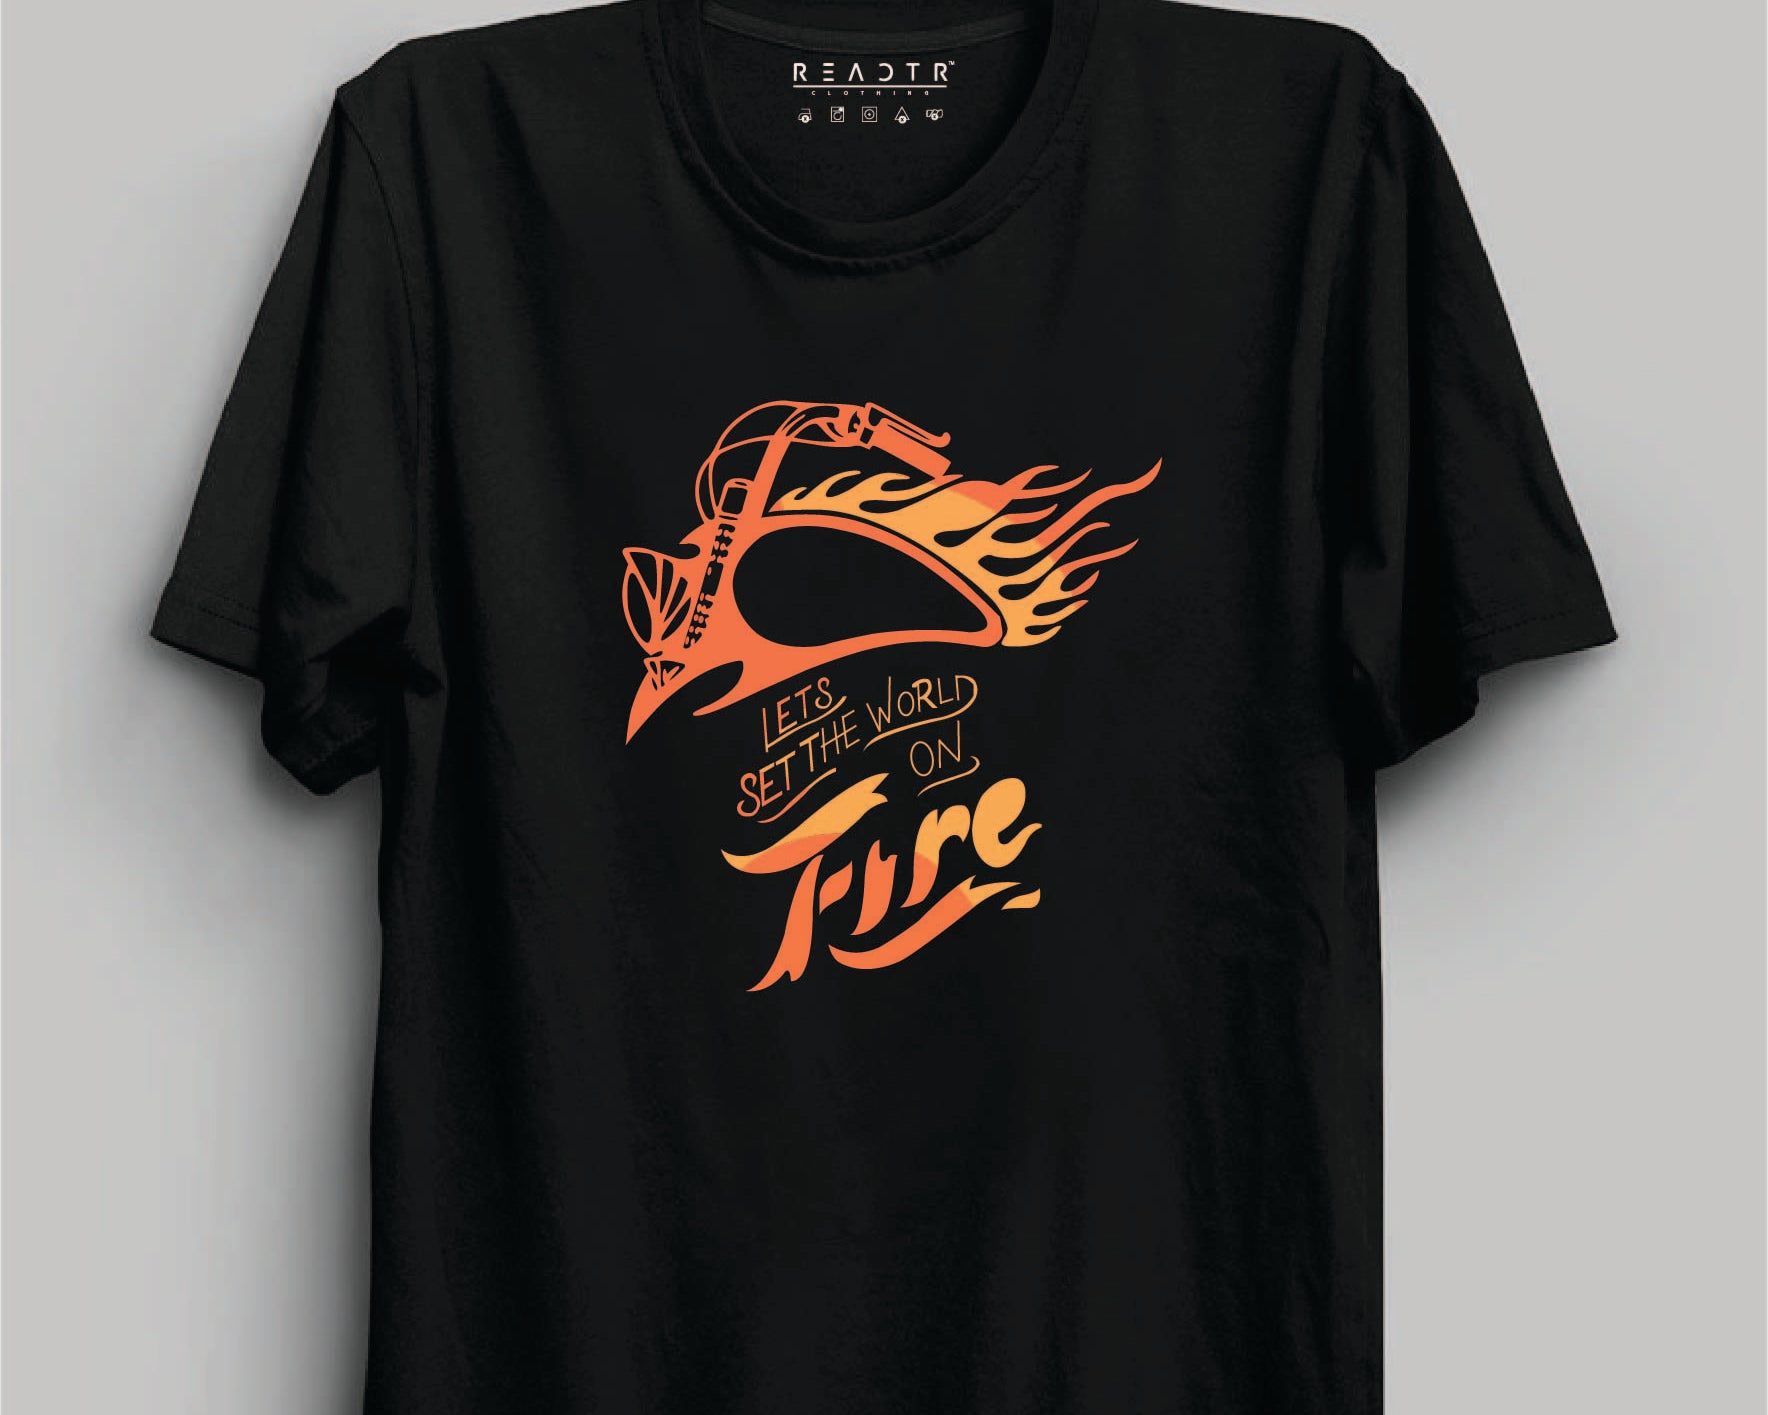 Lets Set The World On Fire Reactr Tshirts For Men - Eyewearlabs